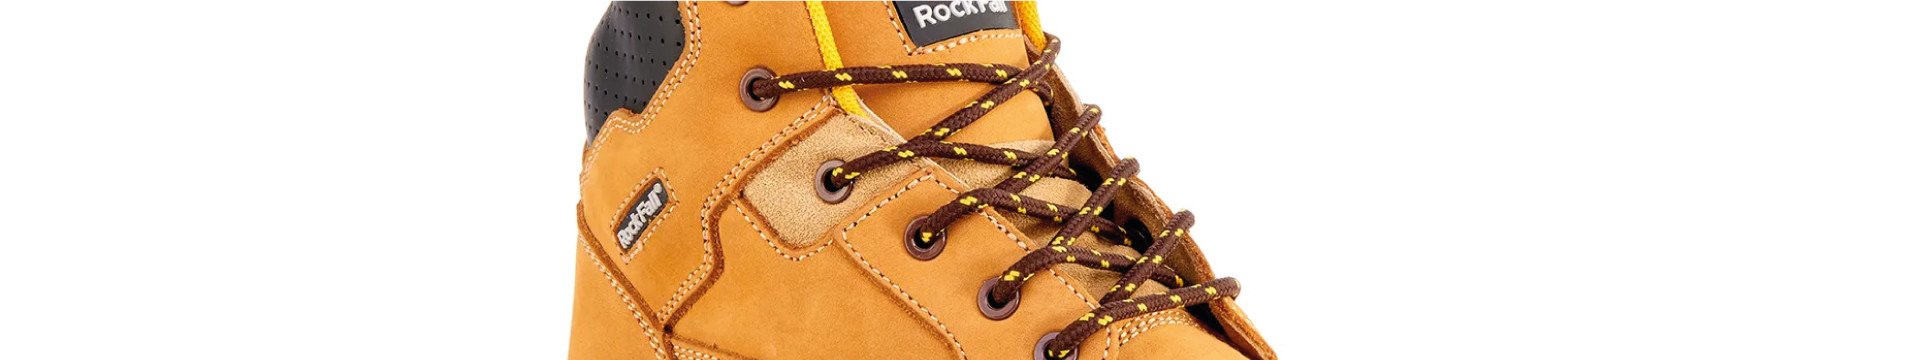 Brown work boots with laces on a white background